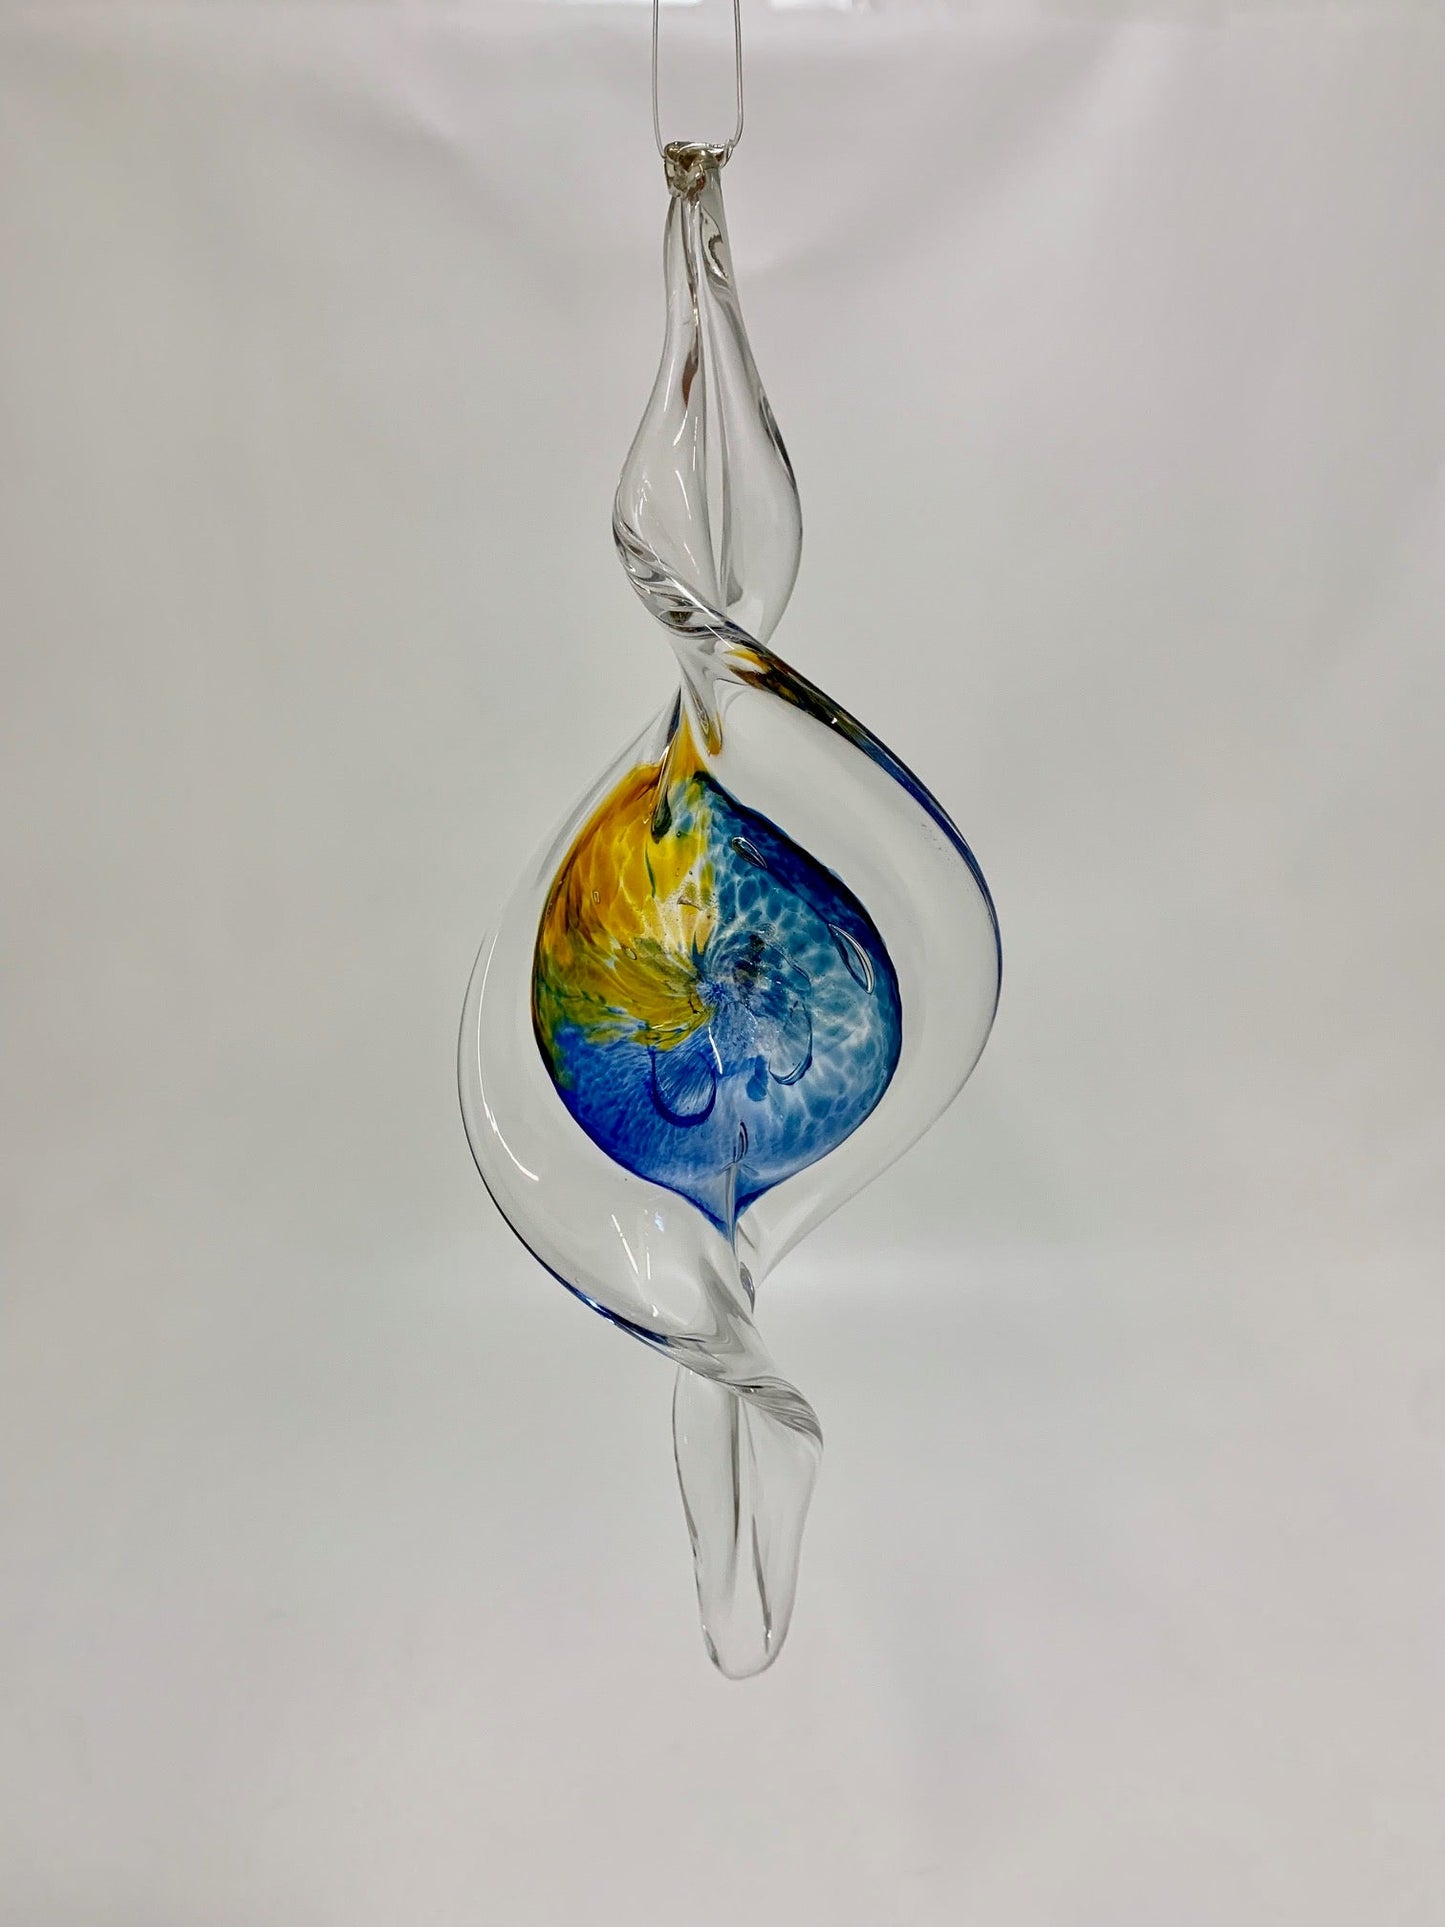 Small Spiral Twist🎨 Glass🎨 Buy Art at Carolina Creations Gallery in Downtown New Bern🎨